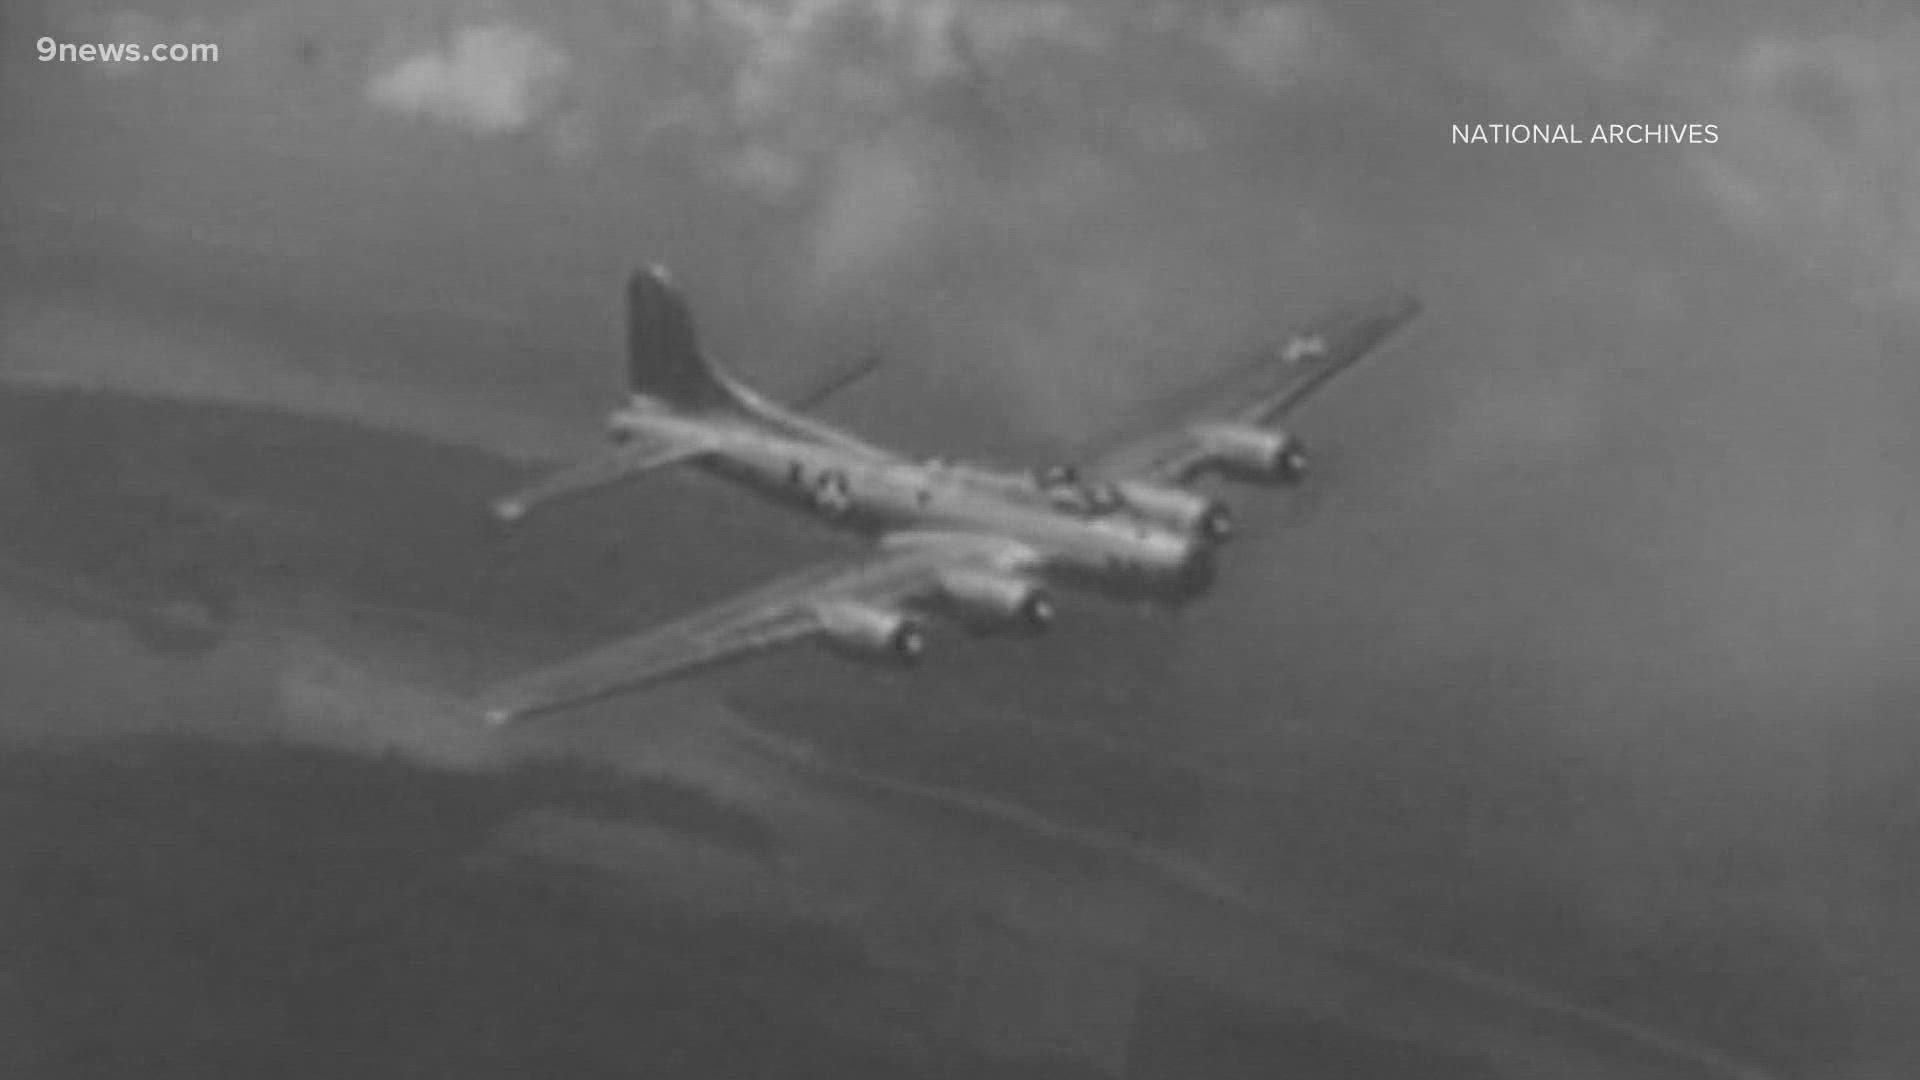 In 1944, a pilot was killed when his B-17 crashed in a farmer's field. Now, there's an effort underway to bring him home.